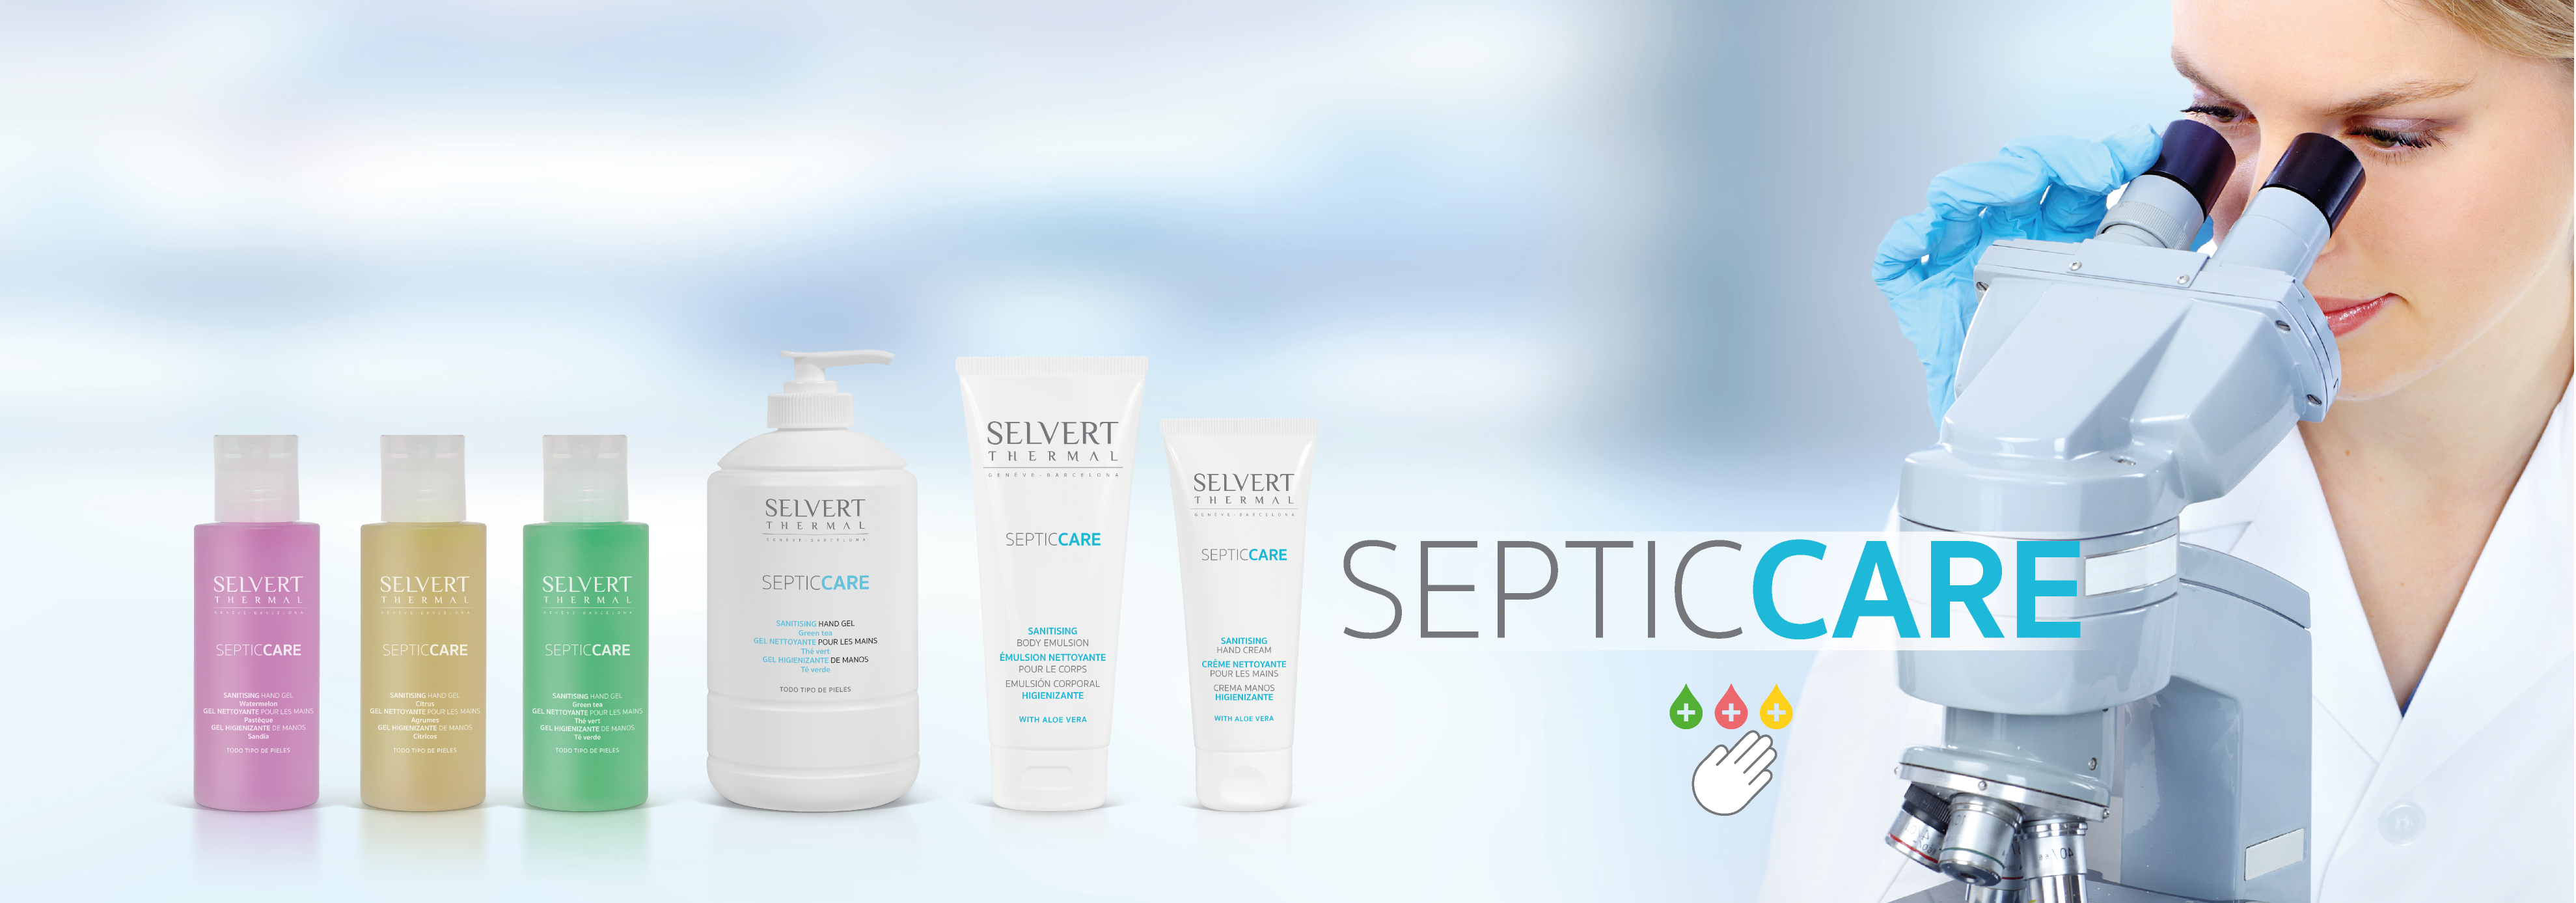 SEPTIC CARE <p>The skin is an essential part of the fight against entry by a wide spectrum of bacteria and viruses. That is why we need to care for your skin and pamper it, to keep it protected from harmful external factors.</p>
<p>Selvert Thermal presents <strong>SEPTIC CARE</strong>, a complete sanitising and moisturising line which protects the natural skin barrier thanks to its well-researched formulation, and which helps to introduce new protective beauty routines day after day.</p>
<p>&nbsp;</p>
<p><strong>Sanitising hand cream:</strong> provides deep hygiene to the skin of the hands while moisturising them all day long thanks to aloe vera, shea butter and calendula oil.</p>
<p>Main ingredients: D-Panthenol, calendula oil, Shea butter, aloe vera, Alpha-bisabolol and BC antiseptic agent.</p>
<p>&nbsp;</p>
<p><strong>Sanitising body emulsion:</strong> helps to achieve deep skin hygiene along with optimal hydration thanks to its formulation with aloe vera, shea butter and calendula oil.</p>
<p>Main ingredients: D-Panthenol, calendula oil, Shea butter, aloe vera, Vitamin E, Alpha-bisabolol and BC antiseptic agent.</p>
<p>&nbsp;</p>
<p><strong>Sanitising hand gel. Watermelon.</strong></p>
<p>This formulation helps to achieve deep and thorough hand hygiene without the need for water. With a pleasant watermelon fragrance.</p>
<p>Main ingredients: natural vegetable alcohol 70%, D-Panthenol.</p>
<p><strong>&nbsp;</strong></p>
<p><strong>Sanitising hand gel. Citrus.</strong></p>
<p>This formulation helps to achieve deep and thorough hand hygiene without the need for water. With a fresh perfume of citrus notes.</p>
<p>Main ingredients: natural vegetable alcohol 70%, D-Panthenol.</p>
<p>&nbsp;</p>
<p><strong>Sanitising hand gel. Green tea. </strong></p>
<p>This formulation helps to achieve deep and thorough hand hygiene without the need for water. With a fresh perfume of green tea.</p>
<p>Main ingredients: natural vegetable alcohol 70%, D-Panthenol.</p>